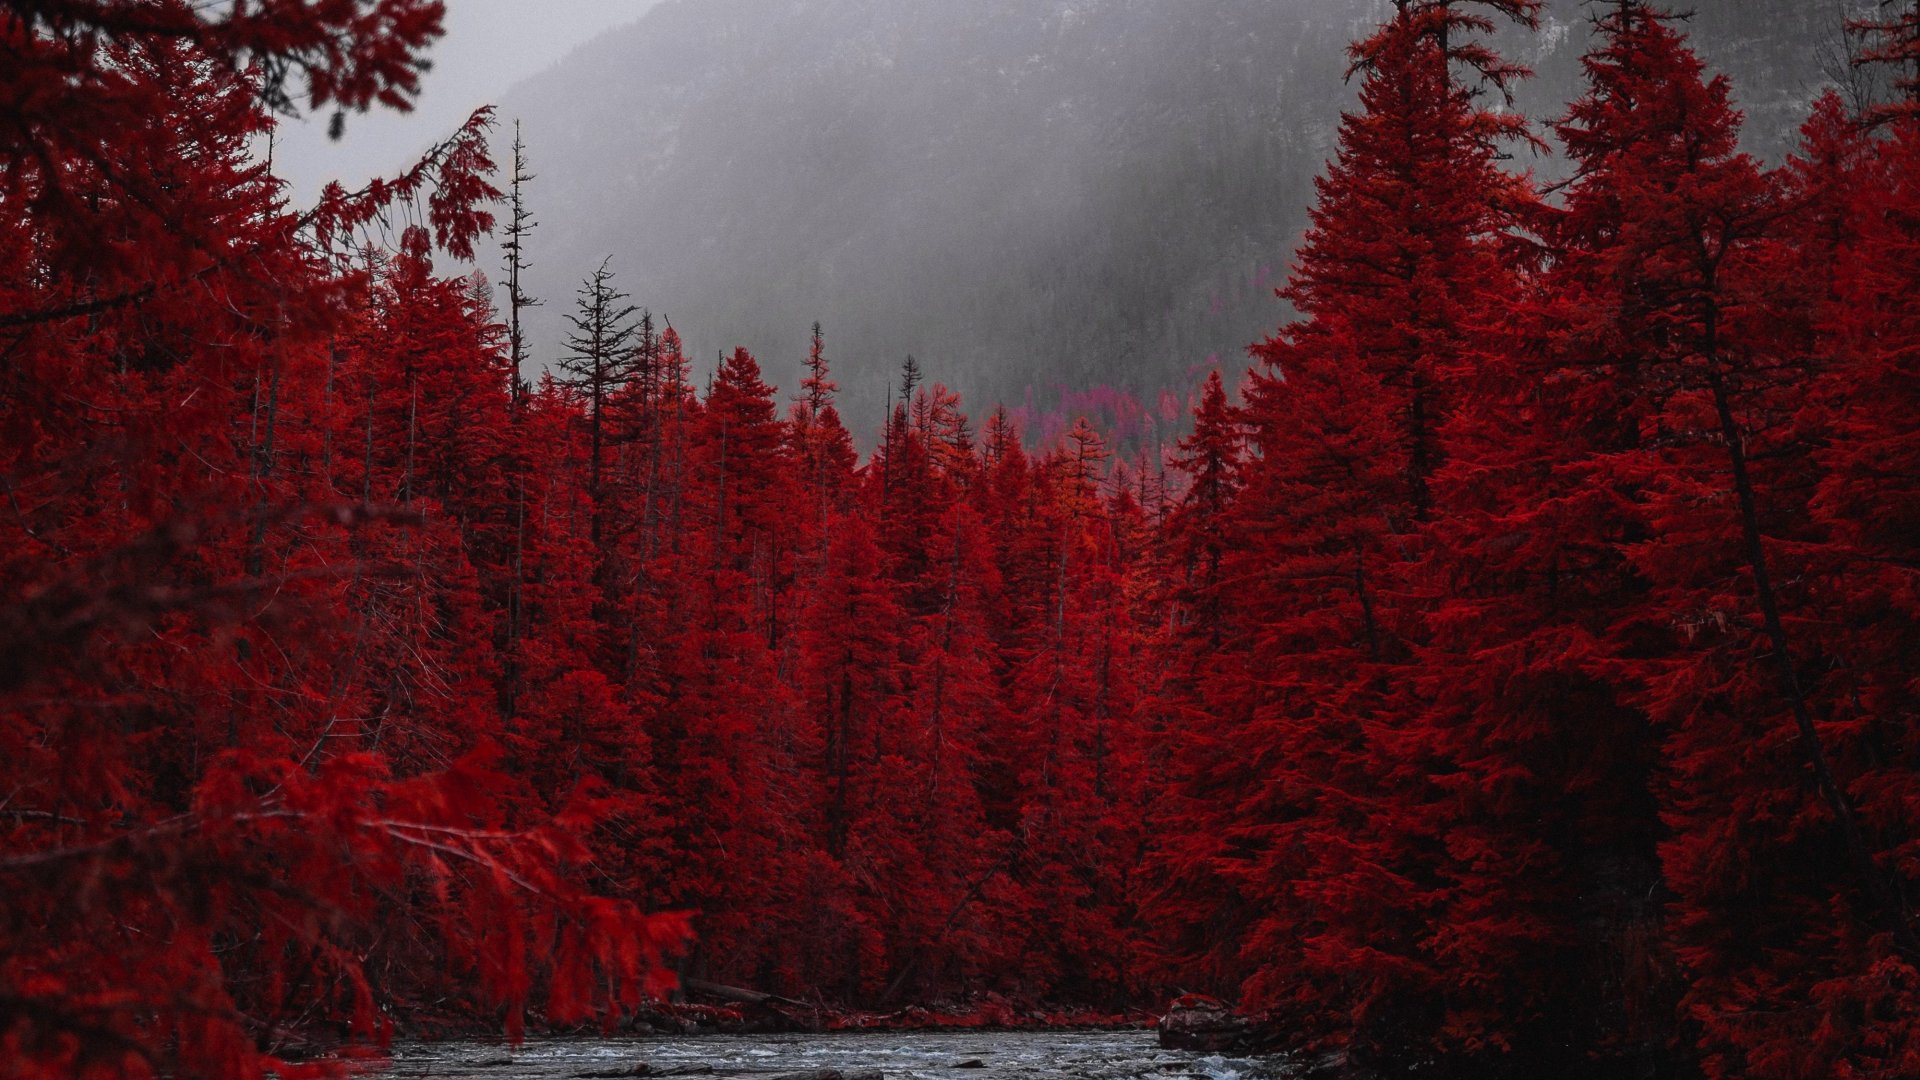 Download wallpaper 1920x1080 red forest, tree, stream, nature, full hd ...